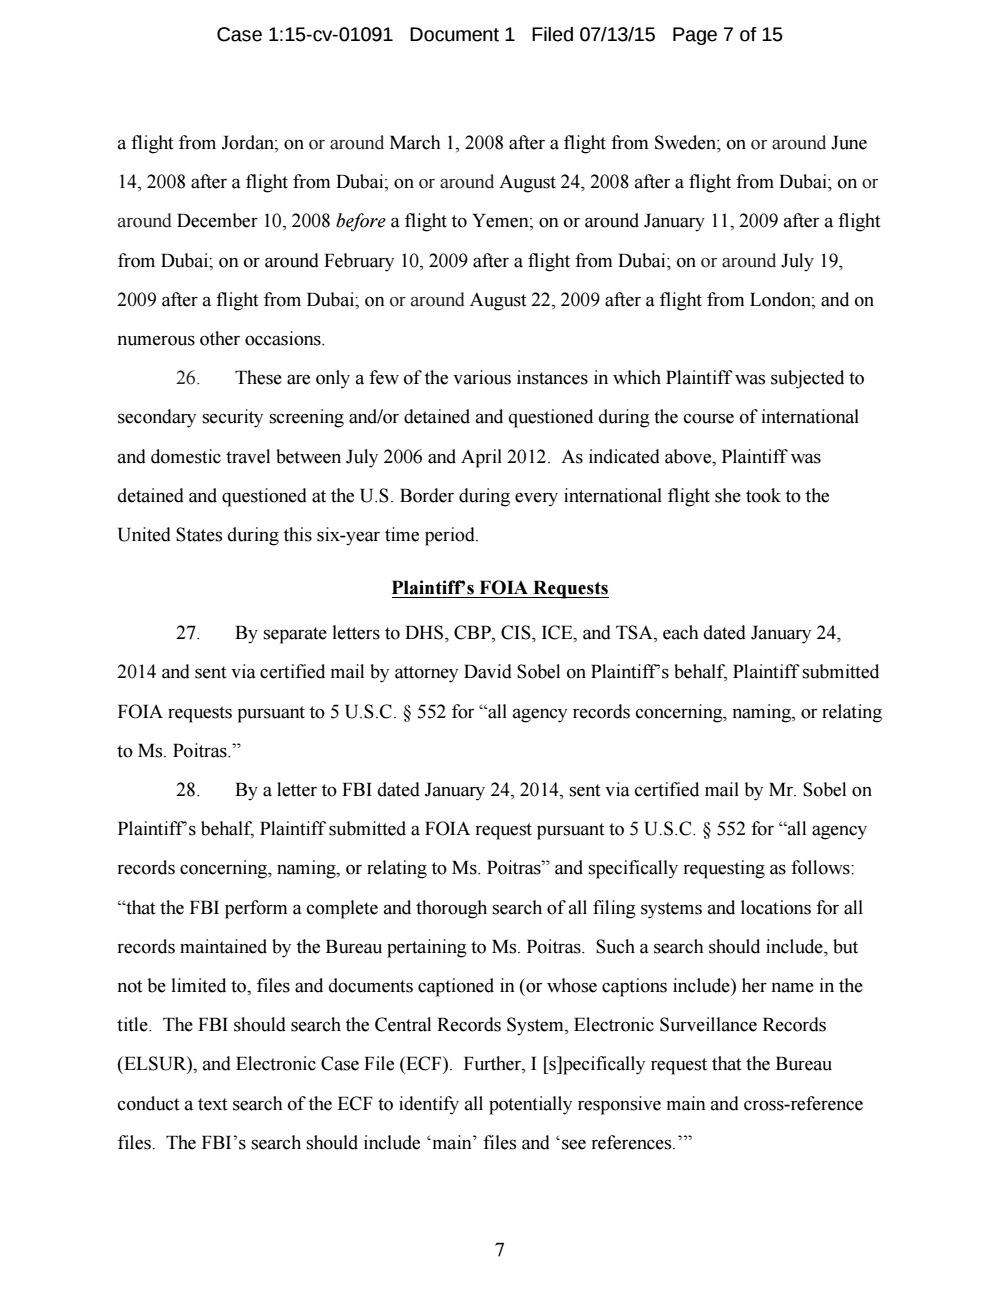 Page 7 from Laura Poitras FOIA Lawsuit